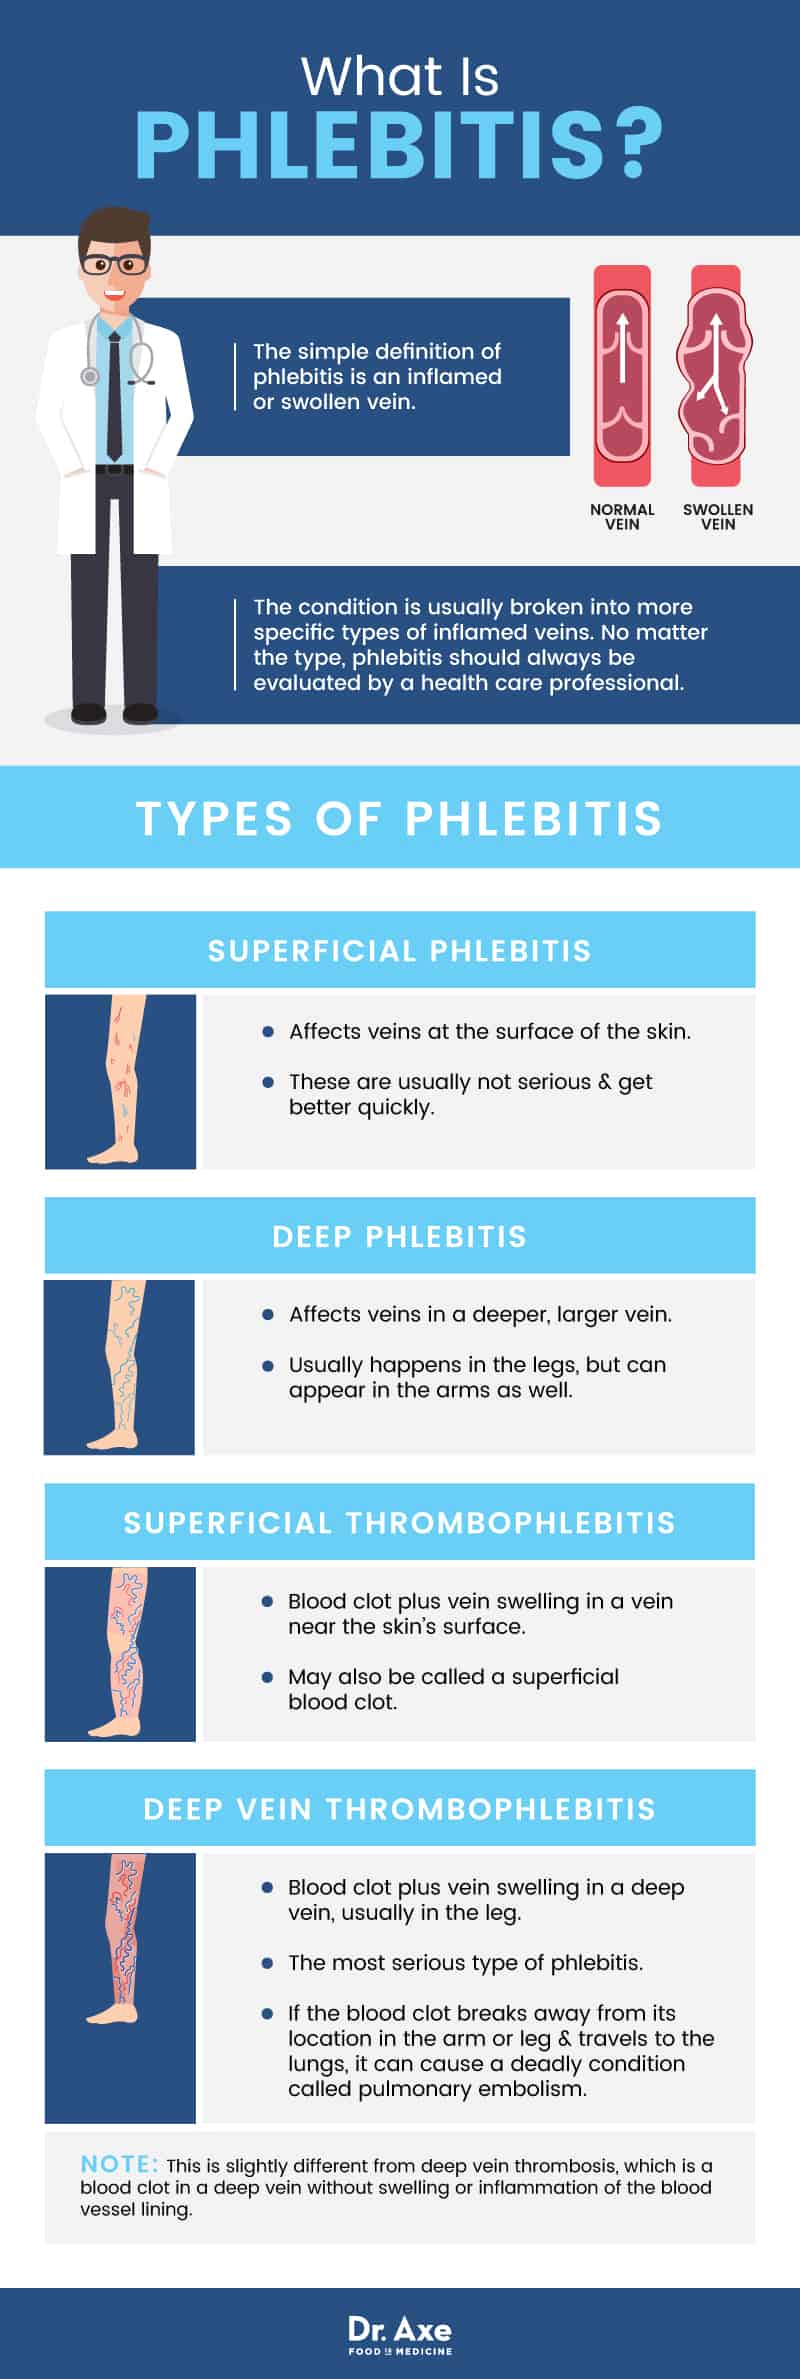 What is phlebitis? - Dr. Axe